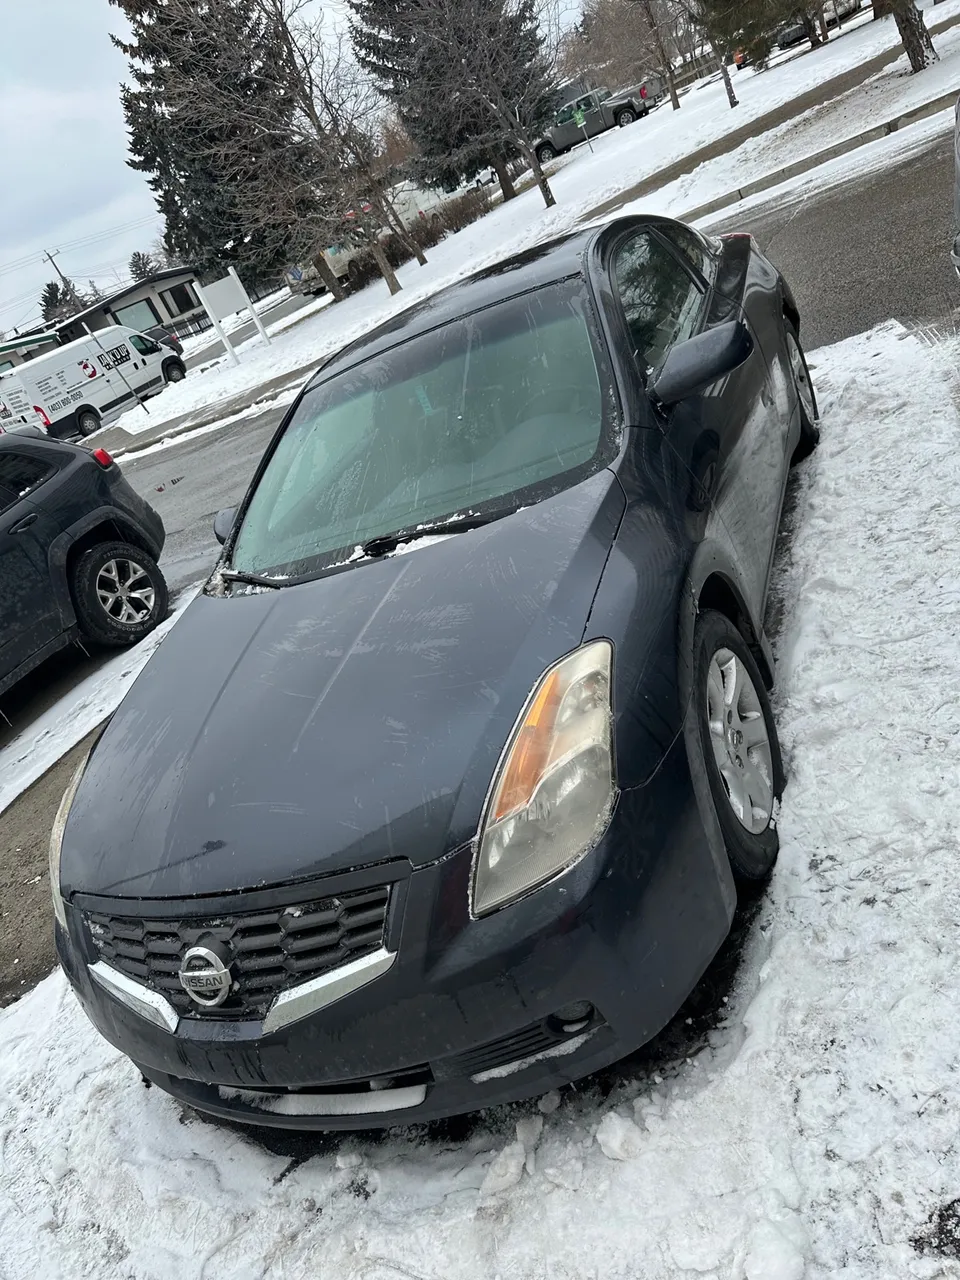 Nissan Altima 2.5s two door coupe with two sets of tires